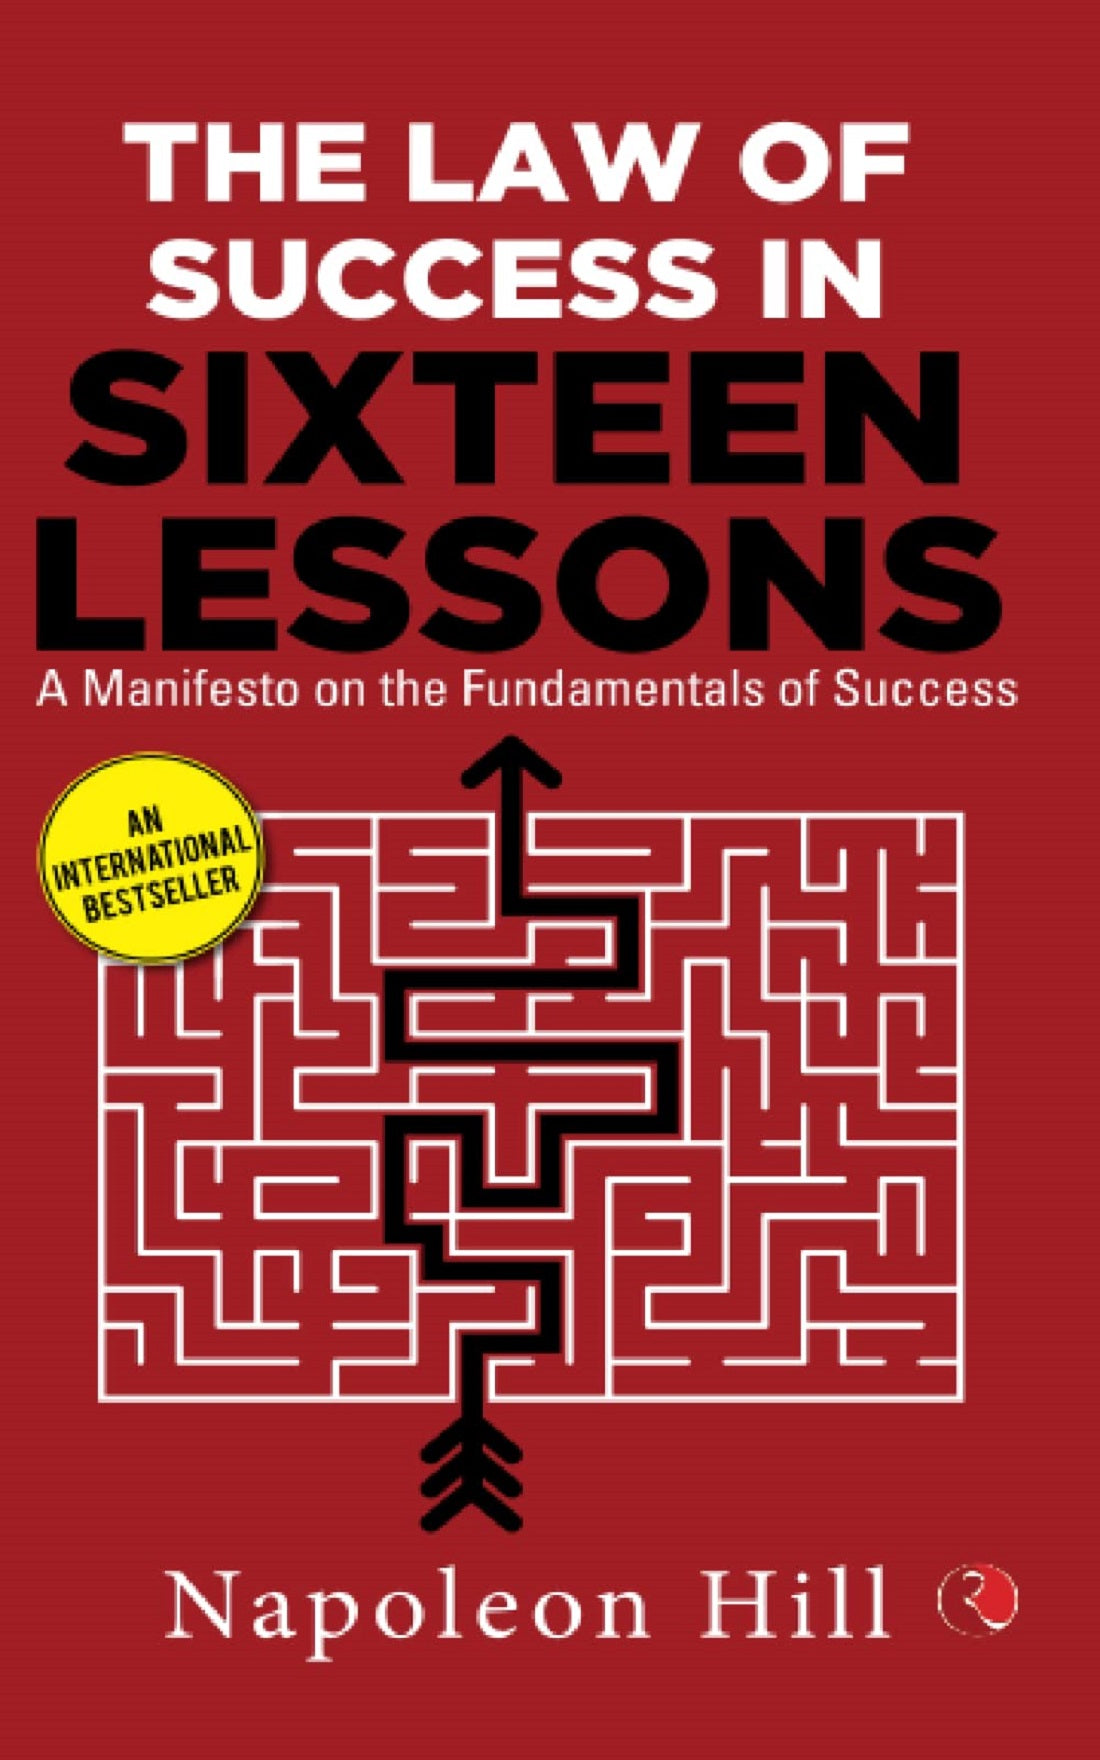 THE LAW OF SUCCESS IN SIXTEEN LESSIONS